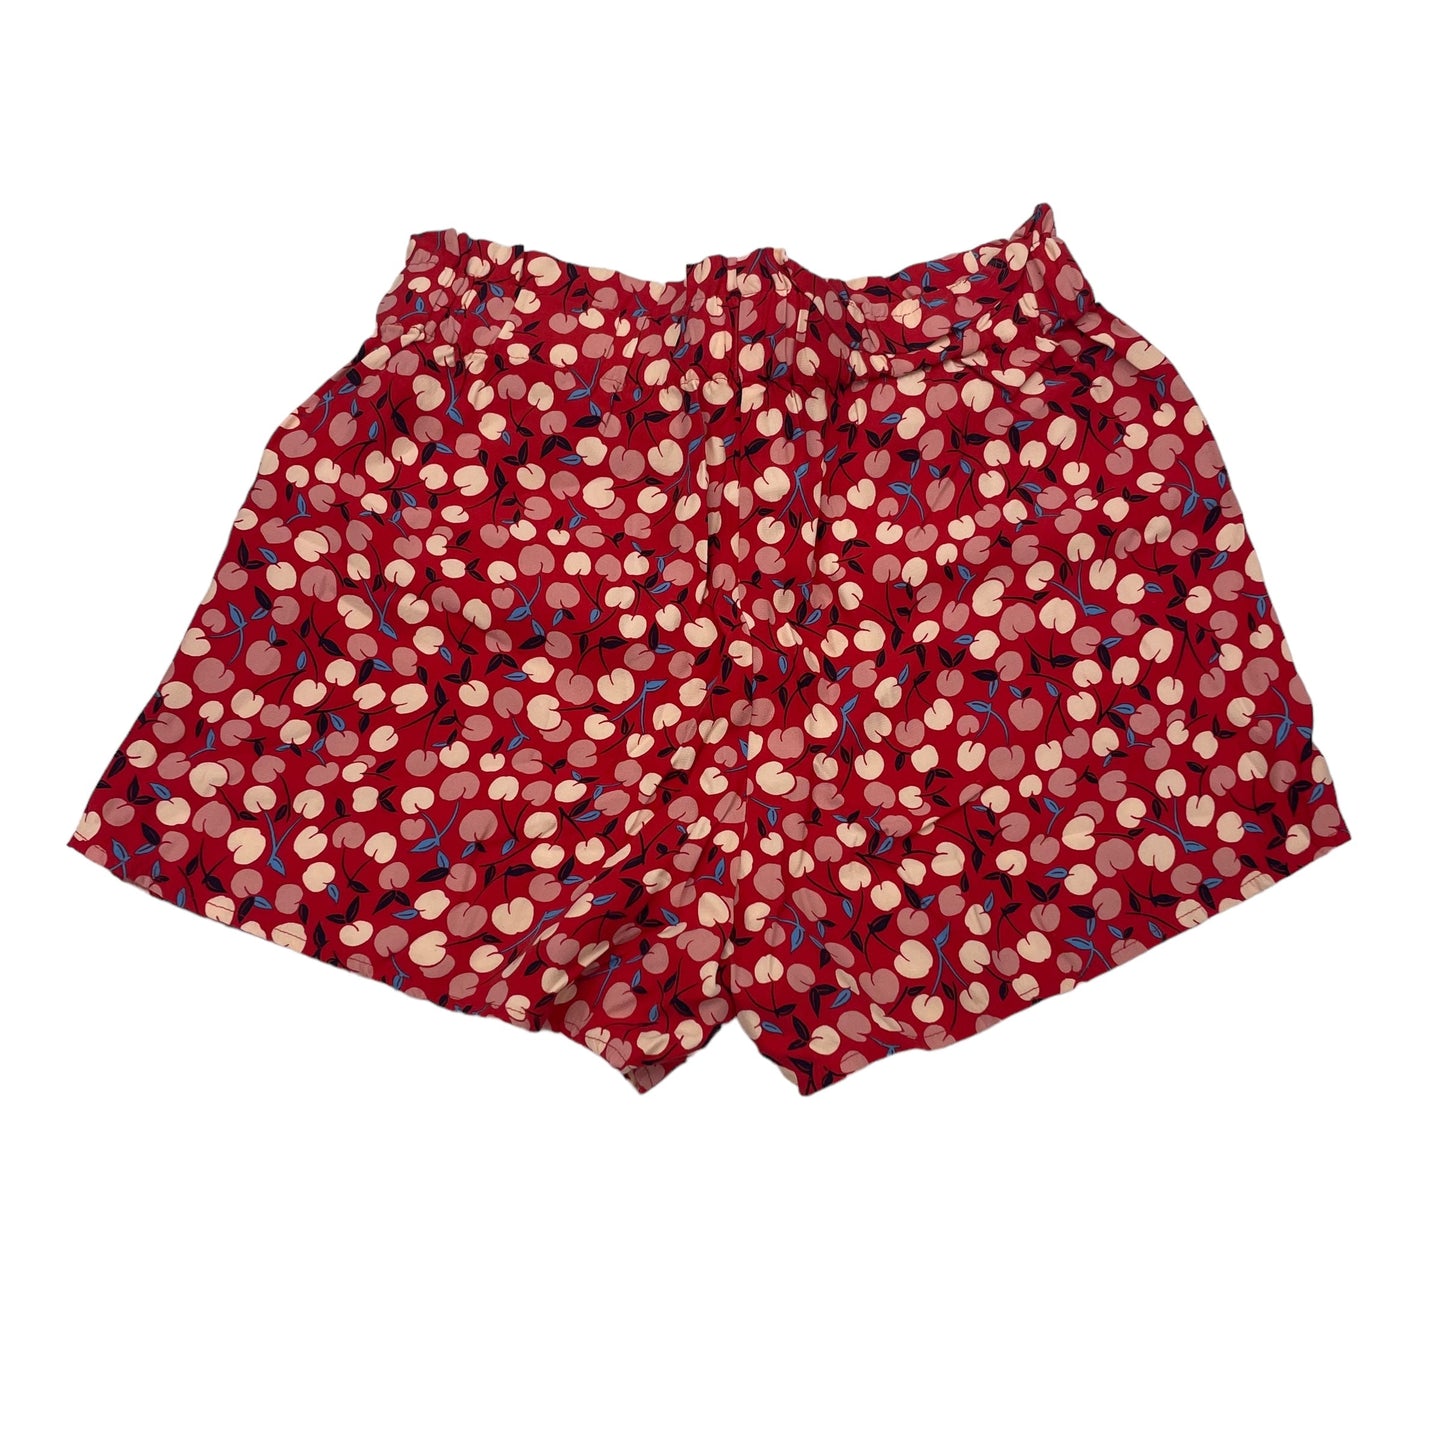 RED SHORTS by LOFT Size:S